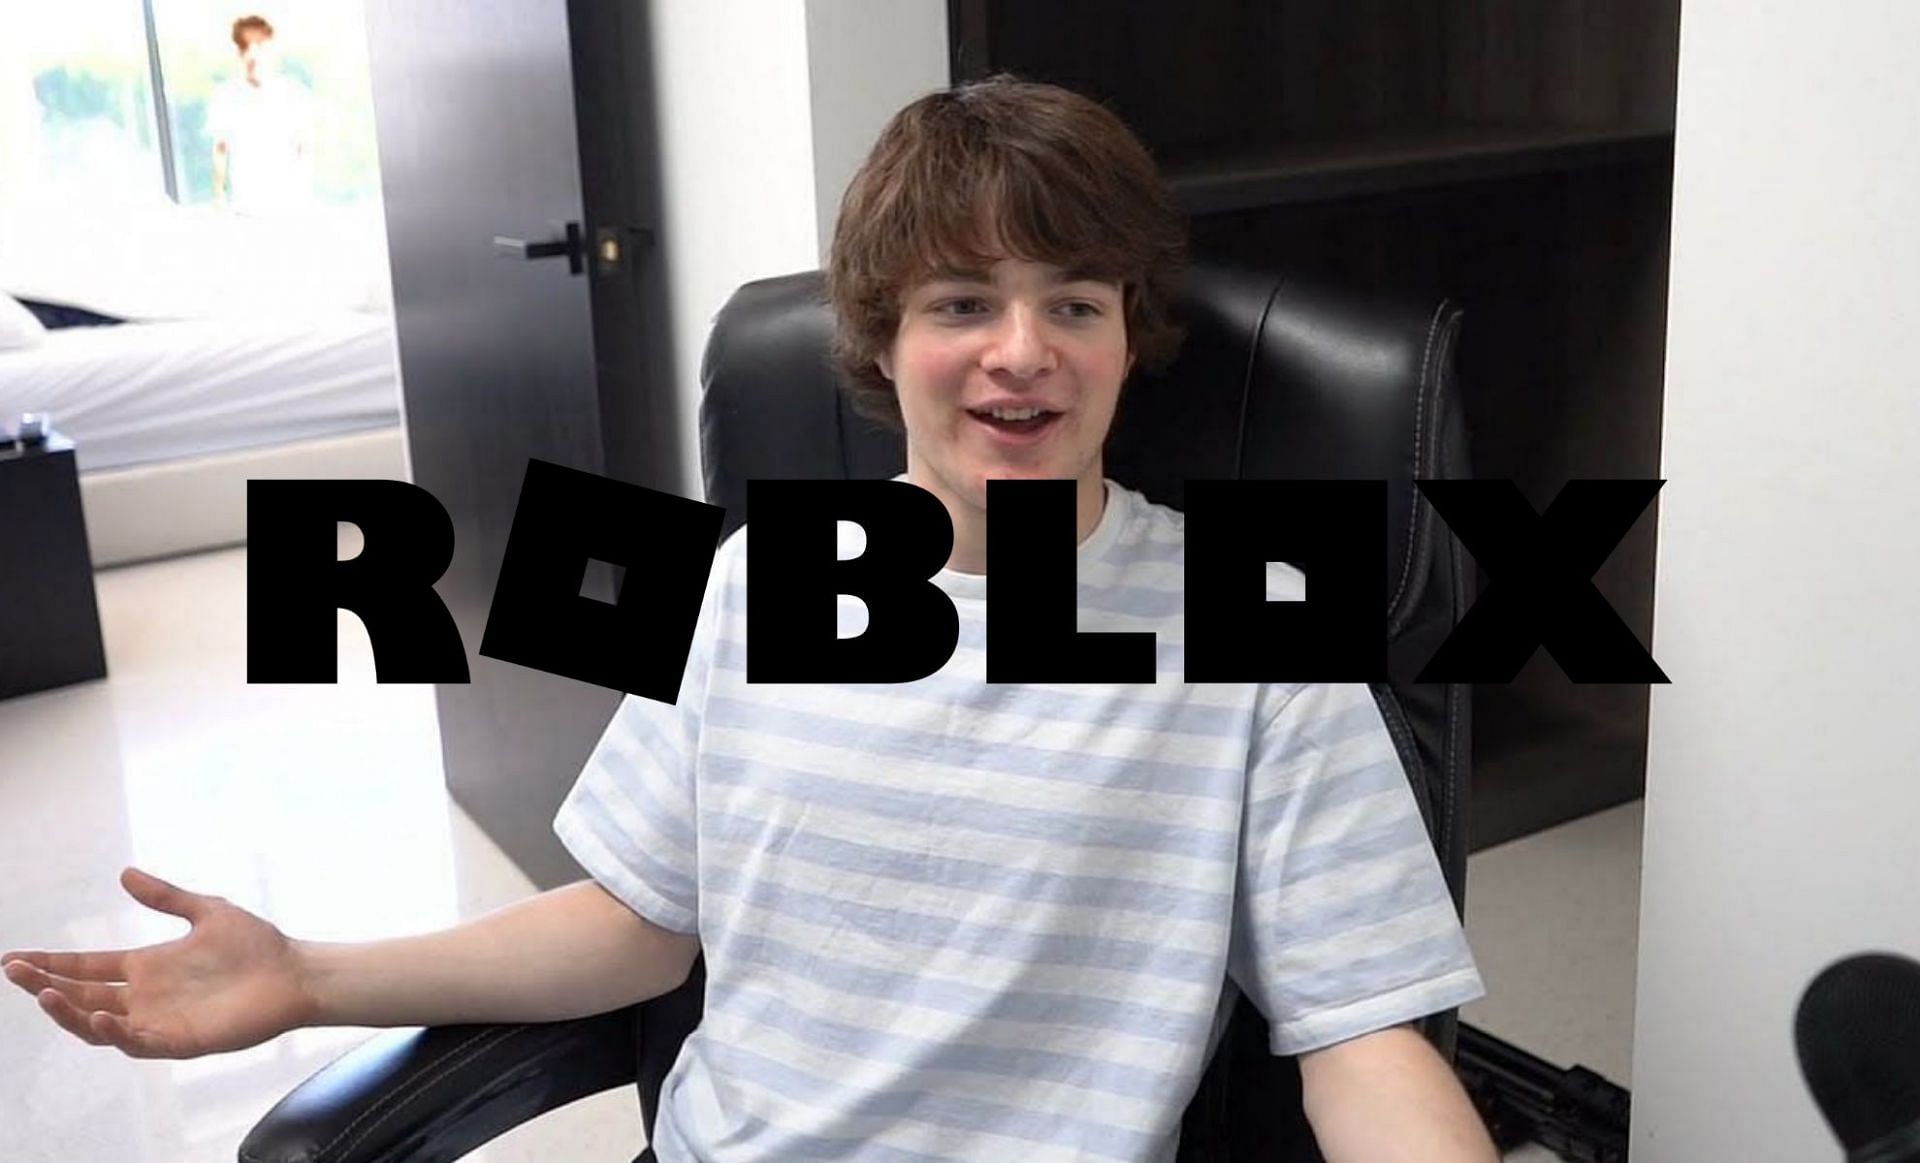 Tubbo has strong feelings about Roblox (Images via YoutTube/Tubbo and Roblox)